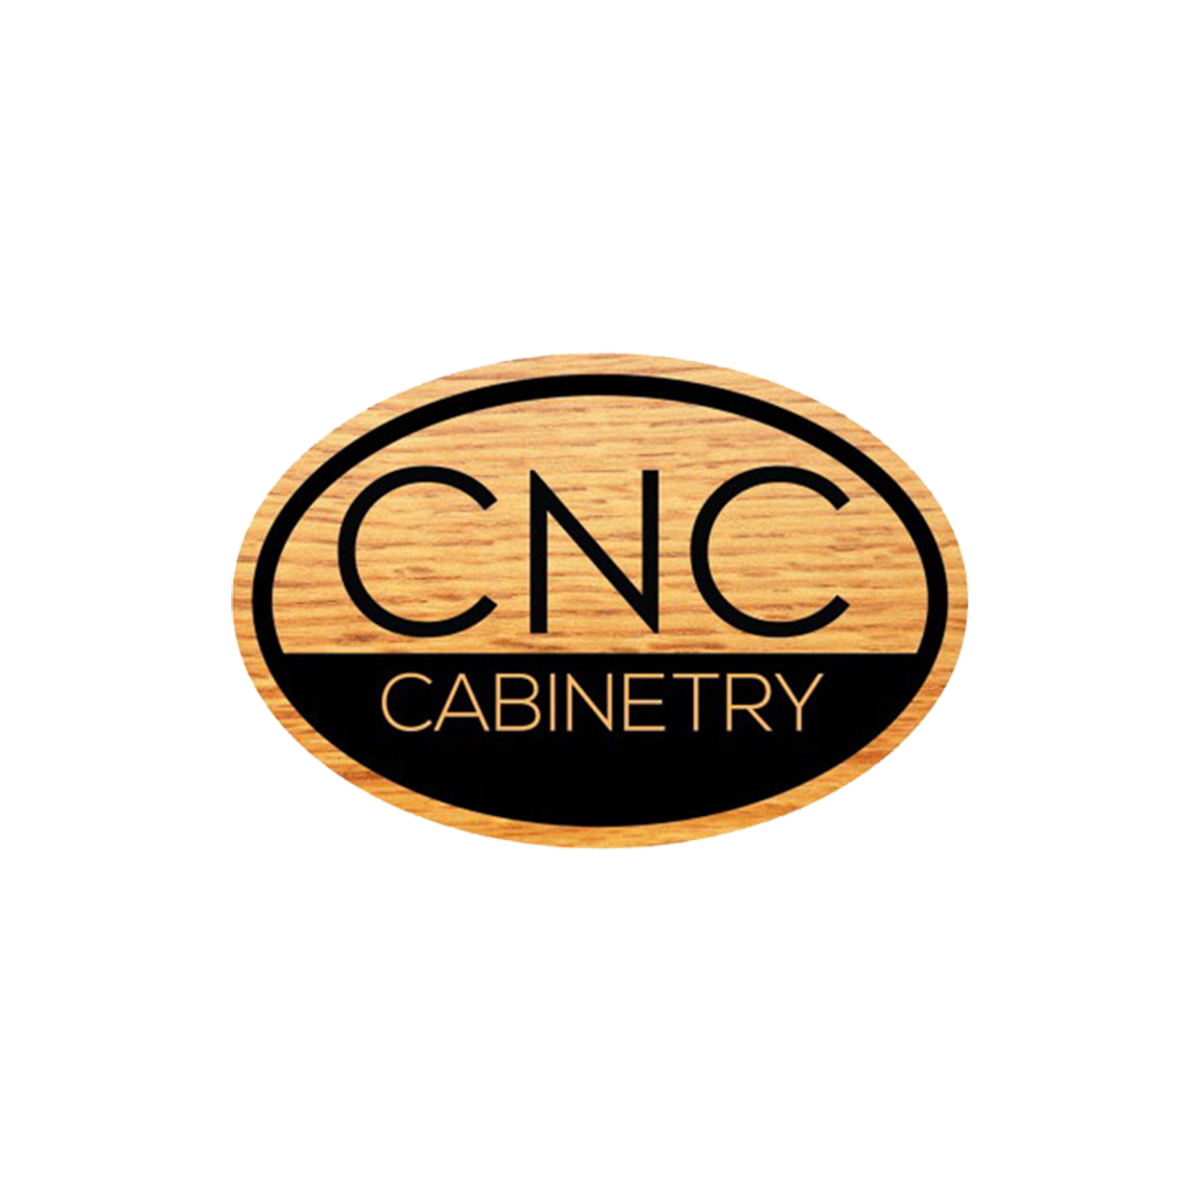 cnc kitchen cabinets in nj